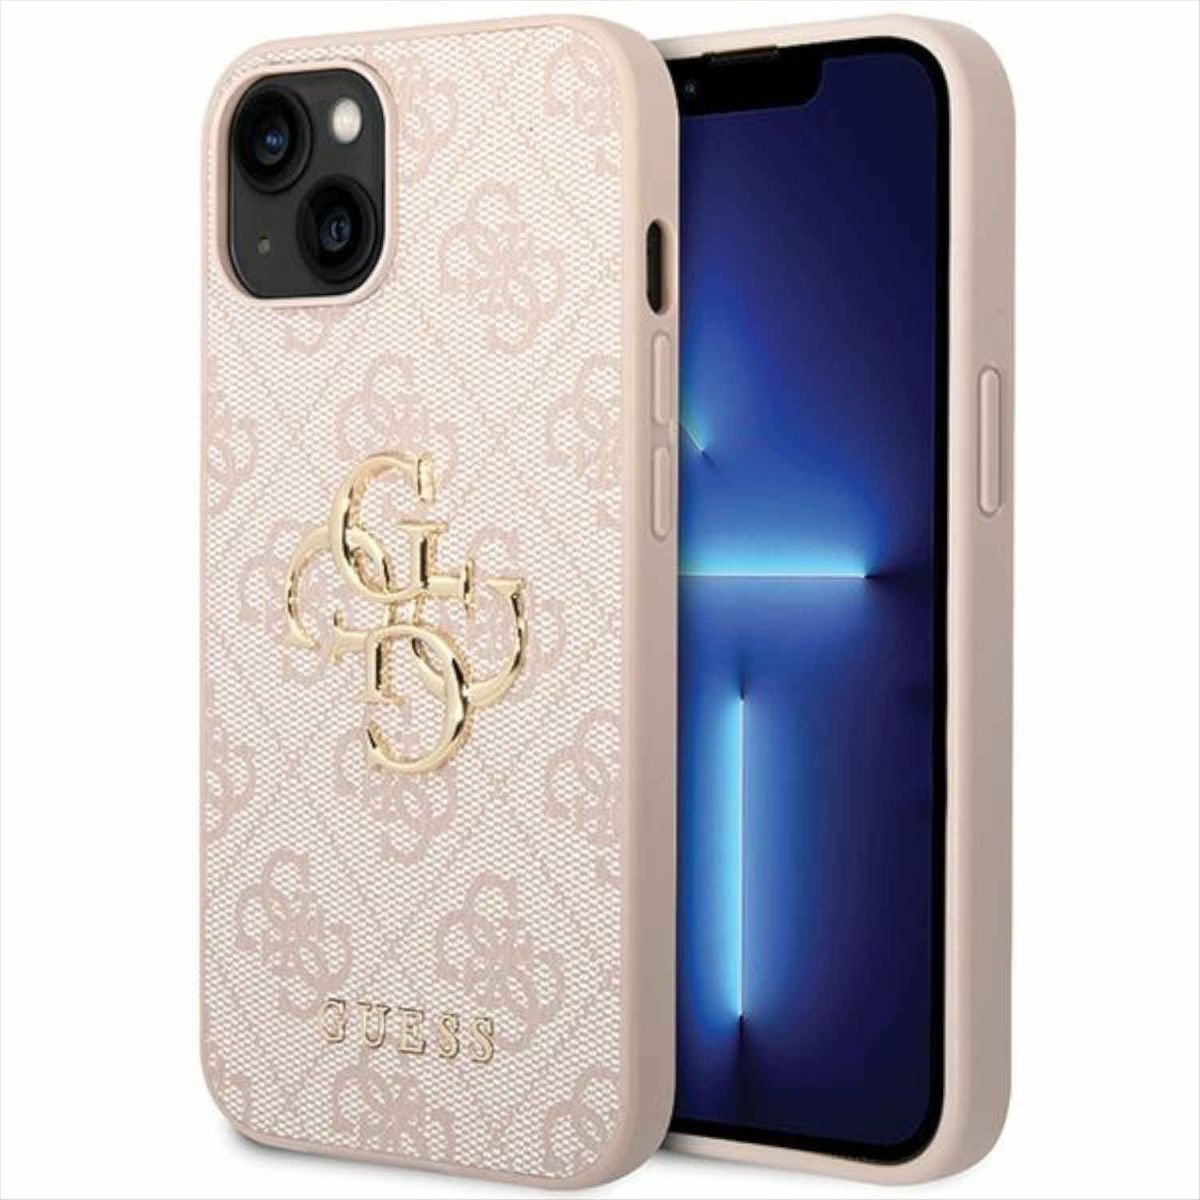 GUESS 4G Metal Gold Logo Design 15 Apple, Backcover, Pink Plus, iPhone Hülle